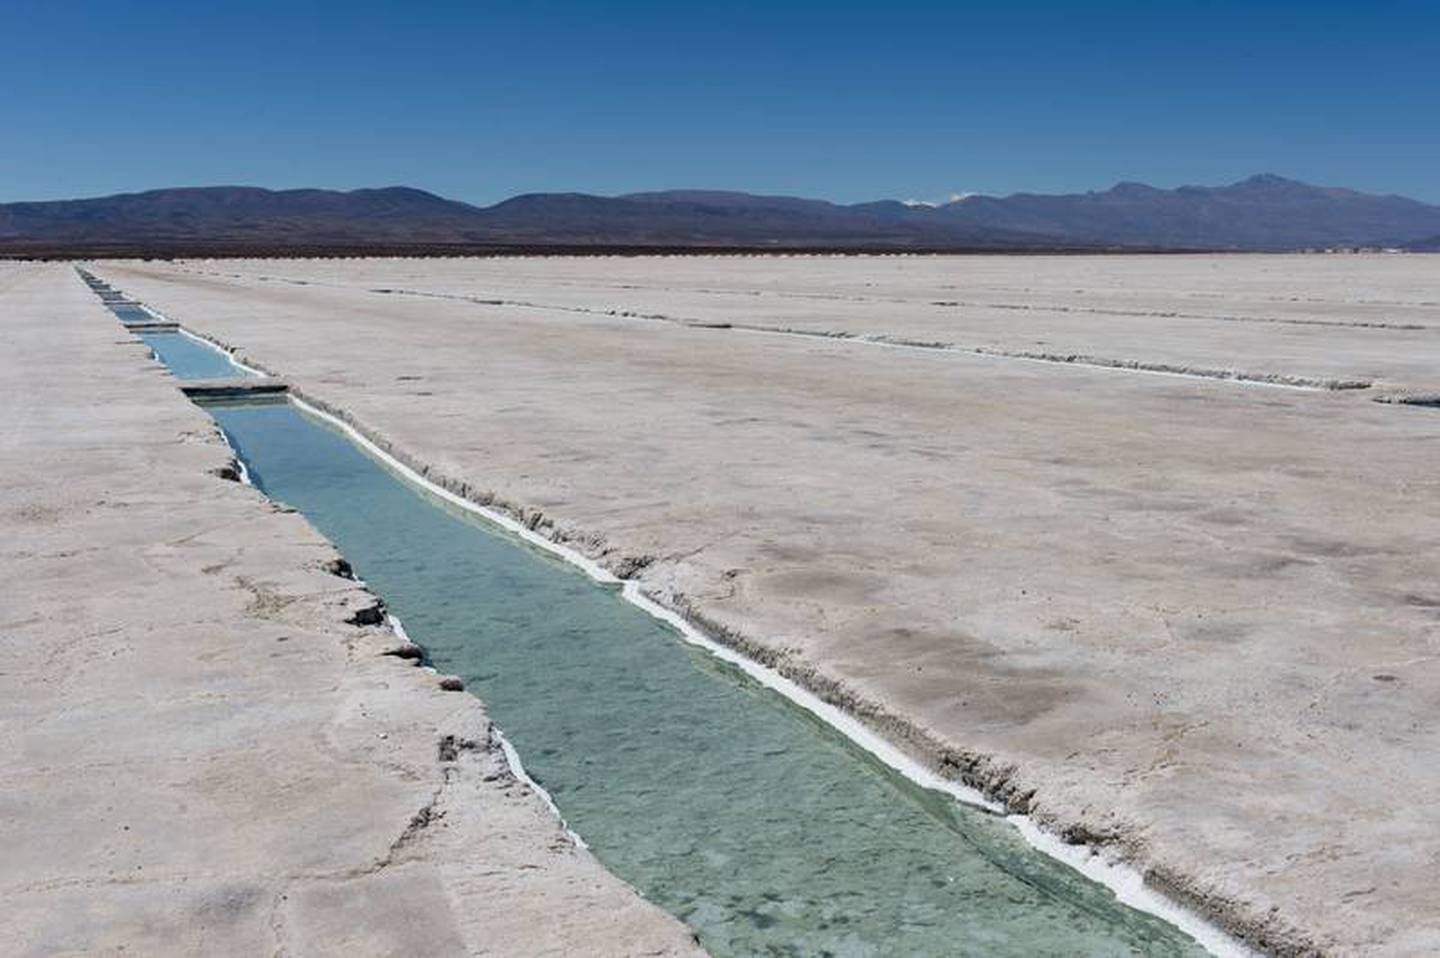 The so-called 'lithium triangle', formed by Argentina, Bolivia and Chile, is the world's largest reserve of the mineral. (Wolfgang Kaehler/Getty Images via Bloomberg)